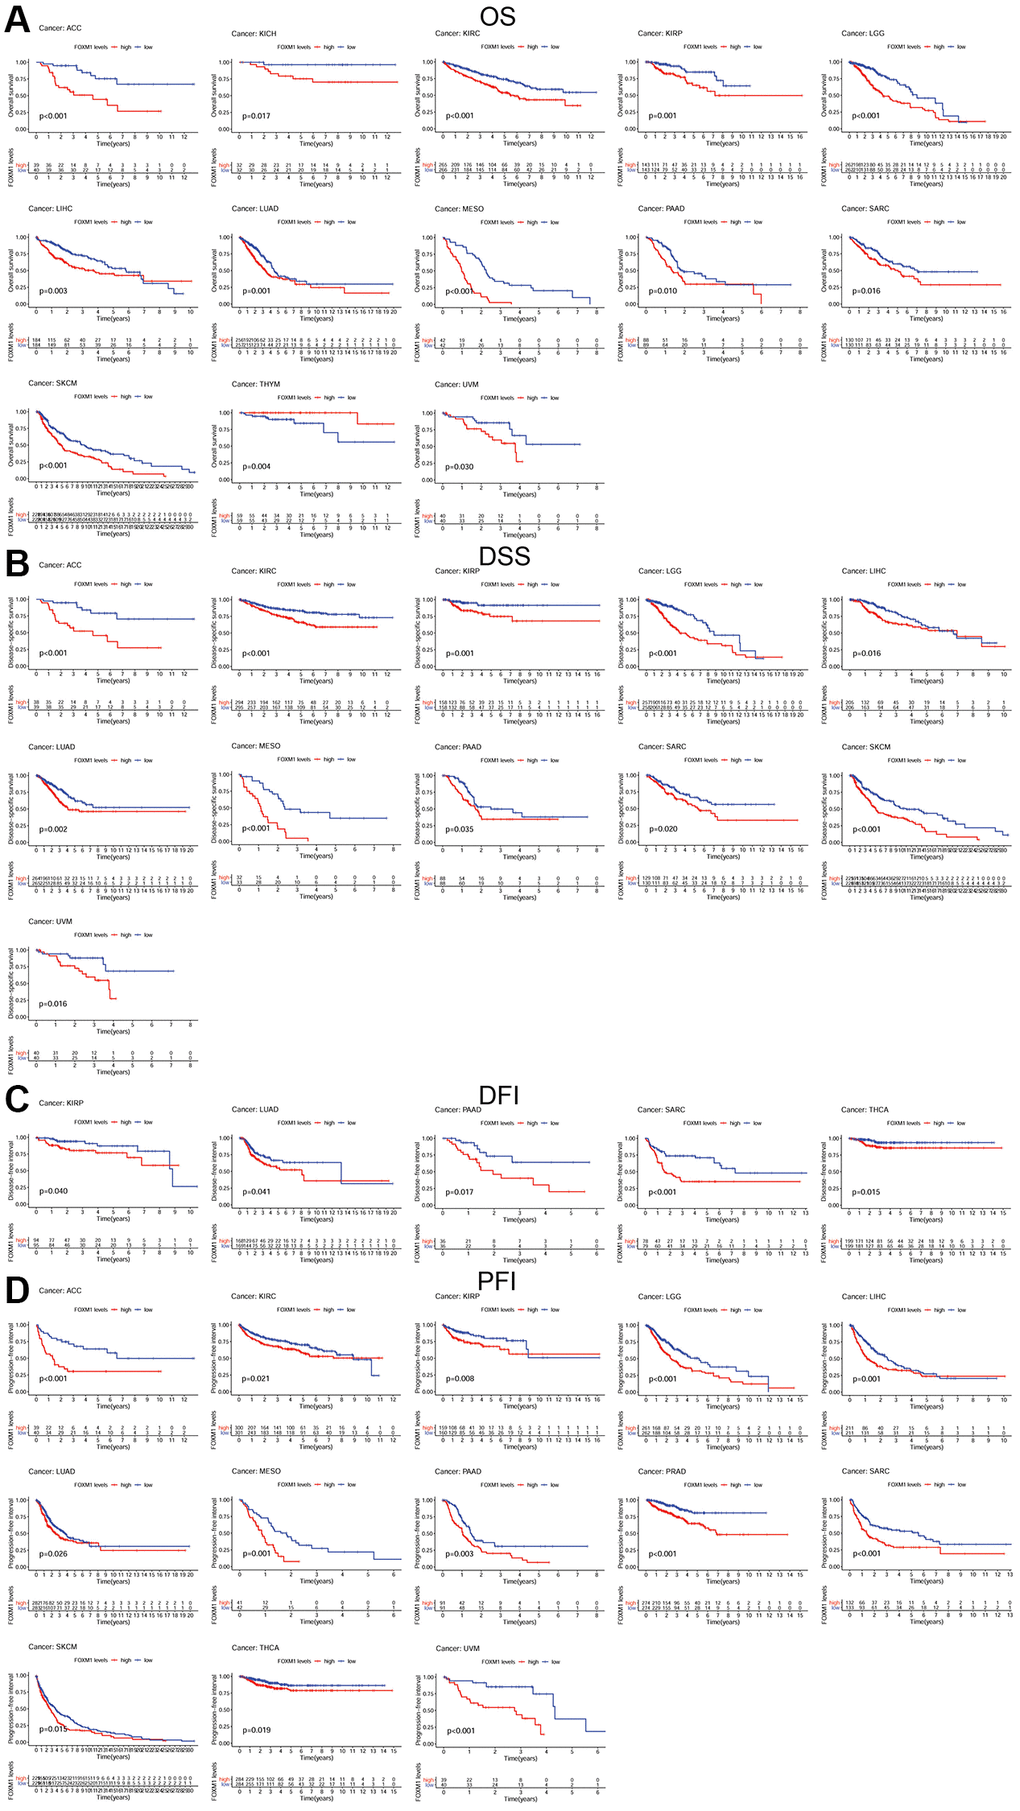 Kaplan-Meier survival curves comparing the expression of FOXM1 in pan-cancer. (A) Kaplan–Meier OS curves for the low expression group and high expression group of FOXM1 in 13 types of cancers; (B) Kaplan–Meier DSS curves for the low expression group and high expression group of FOXM1 in 11 types of cancers; (C) Kaplan–Meier DFI curves for the low expression group and high expression group of FOXM1 in 5 types of cancers; (D) Kaplan–Meier PFI curves for the low expression group and high expression group of FOXM1 in 13 types of cancers. p 